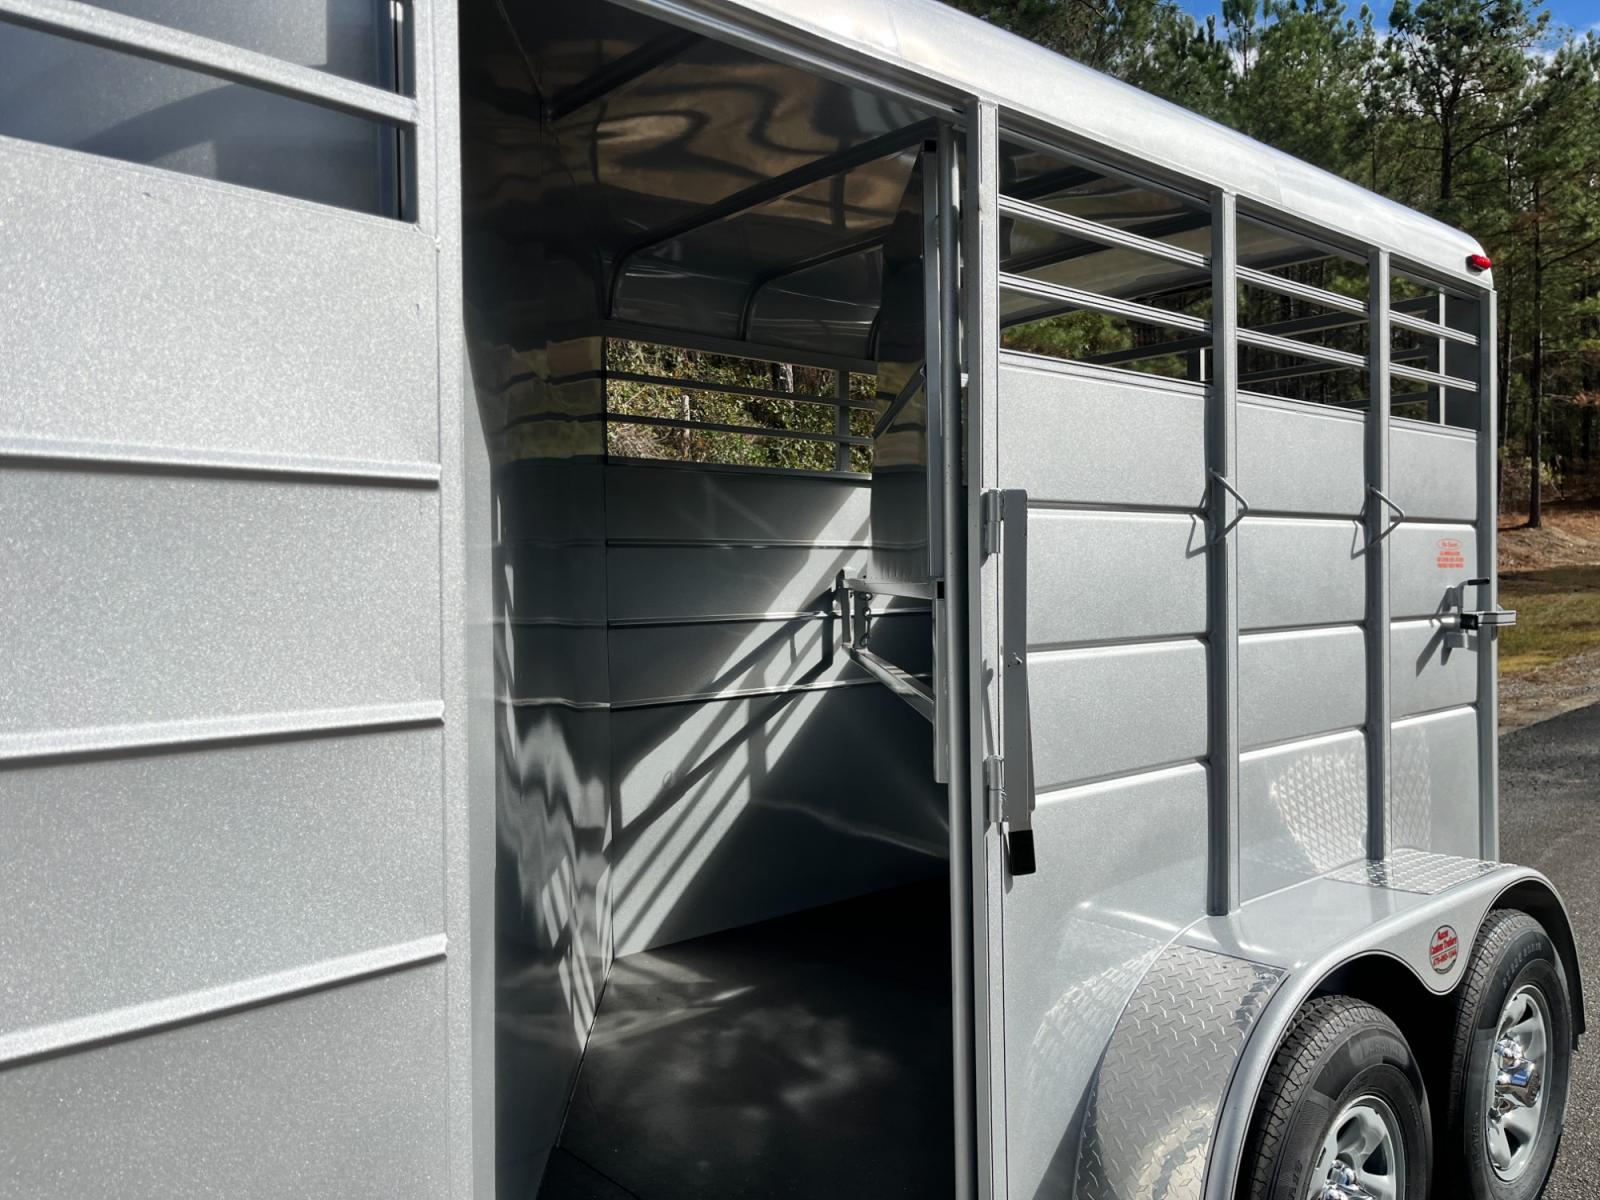 2023 Silver Metallic Calico 2 Horse Slant , located at 1330 Rainey Rd., Macon, 31220, (478) 960-1044, 32.845638, -83.778687 - Brand New 2023 Model 2 Horse Slant Calico Brand Trailer! 6ft Wide X 13ft Long Deluxe Model Tandem Axle Trailer! Easy Close Slant Divider Latch! 16" Radials! Beautiful Silver Metallic Paint is Awesome! Black Pin Striping Looks Fantastic! Fully Caulked Inside and Out to Prevent Rust! The Paint i - Photo #23